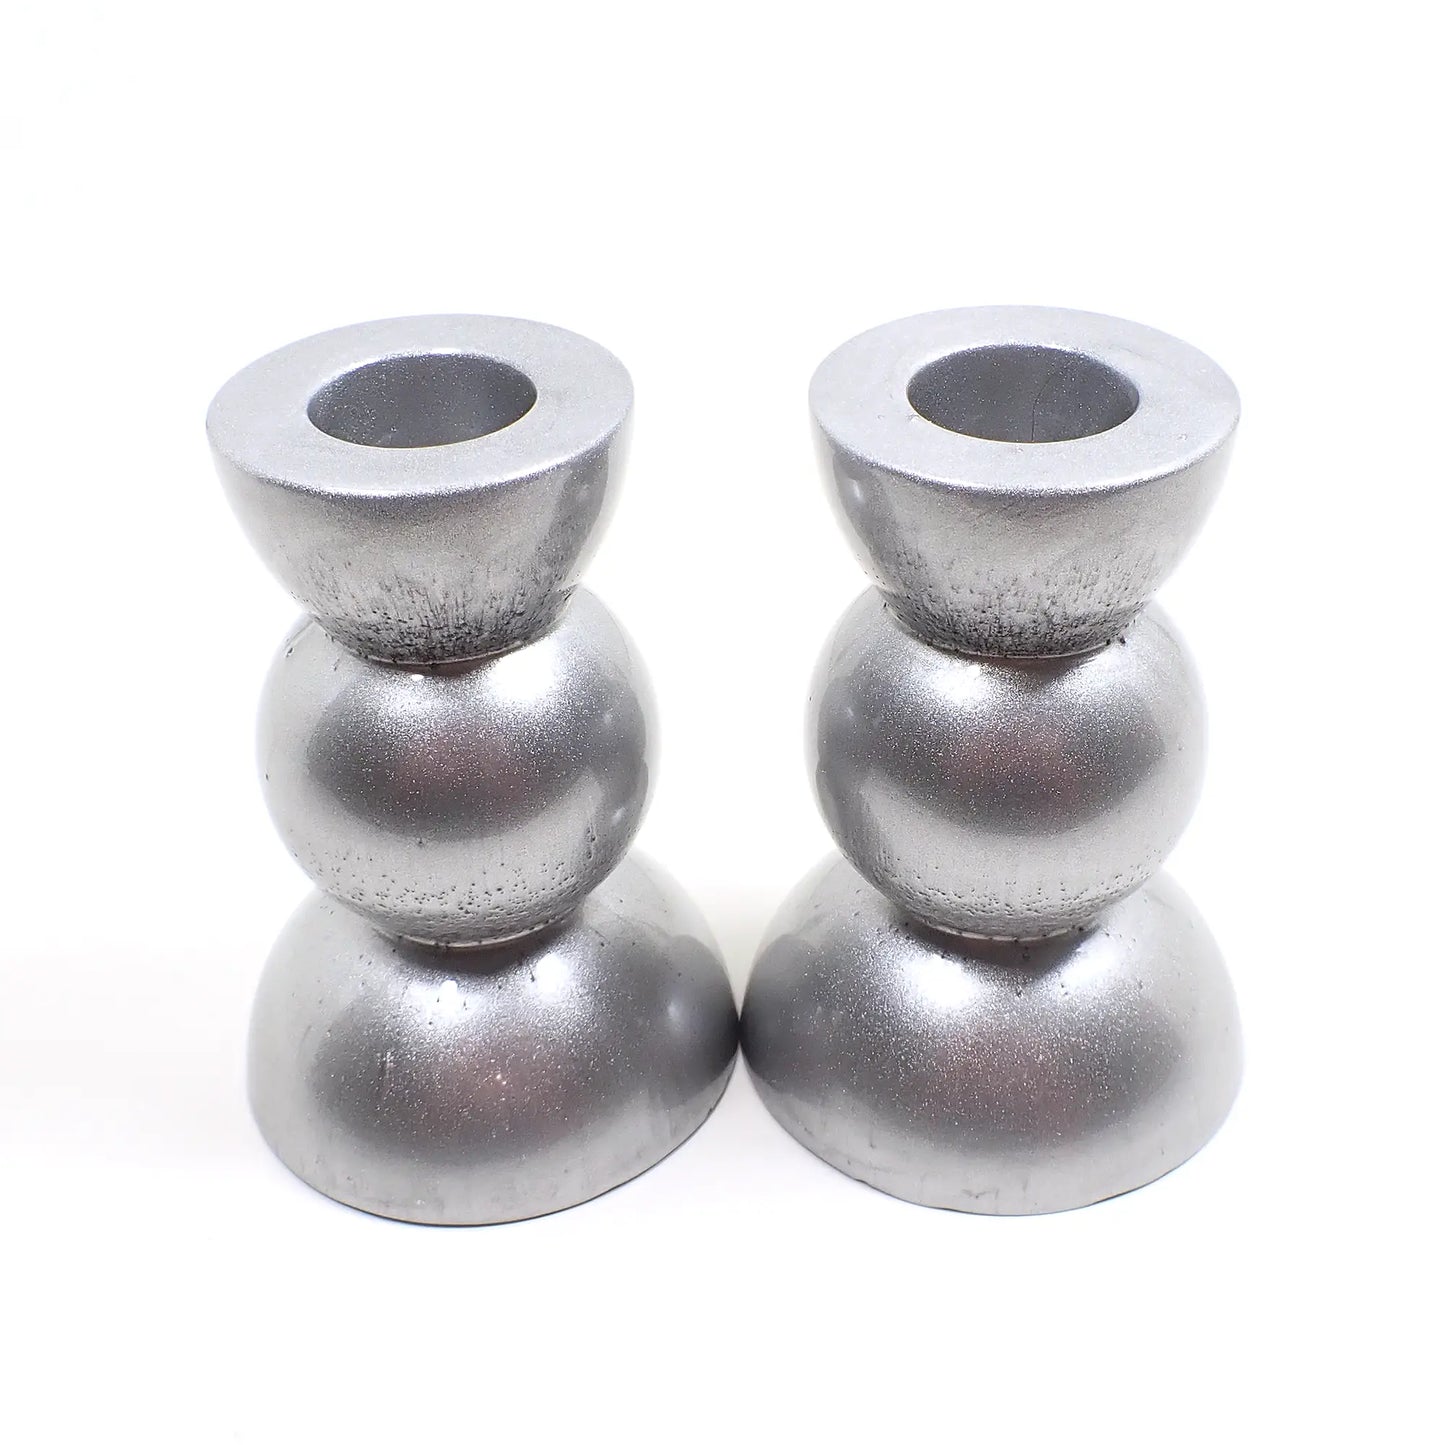 Side view of the handmade geometric candlestick holders. They have a round ball area in the middle and a semi sphere shape on the top and bottom. The resin is a rich shade of pearly metallic silver color.